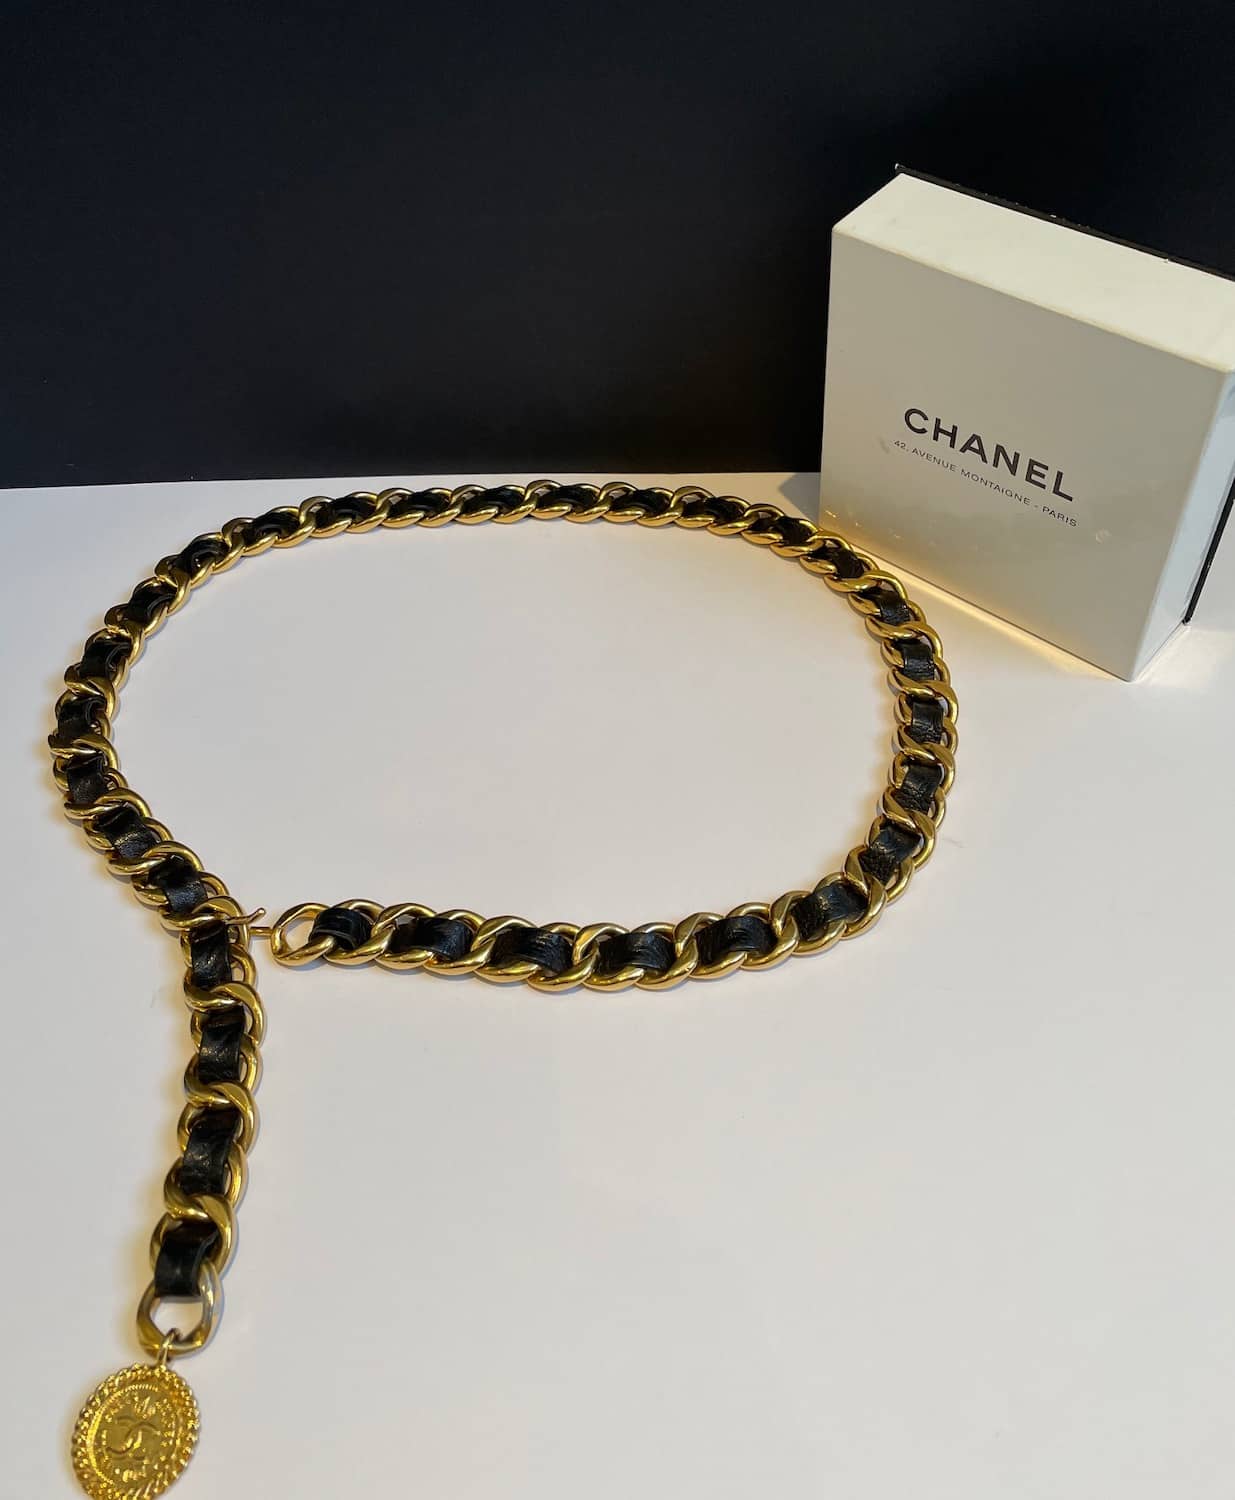 Vintage CHANEL CHARM Belt / Necklace Collectable Gold Black Chain